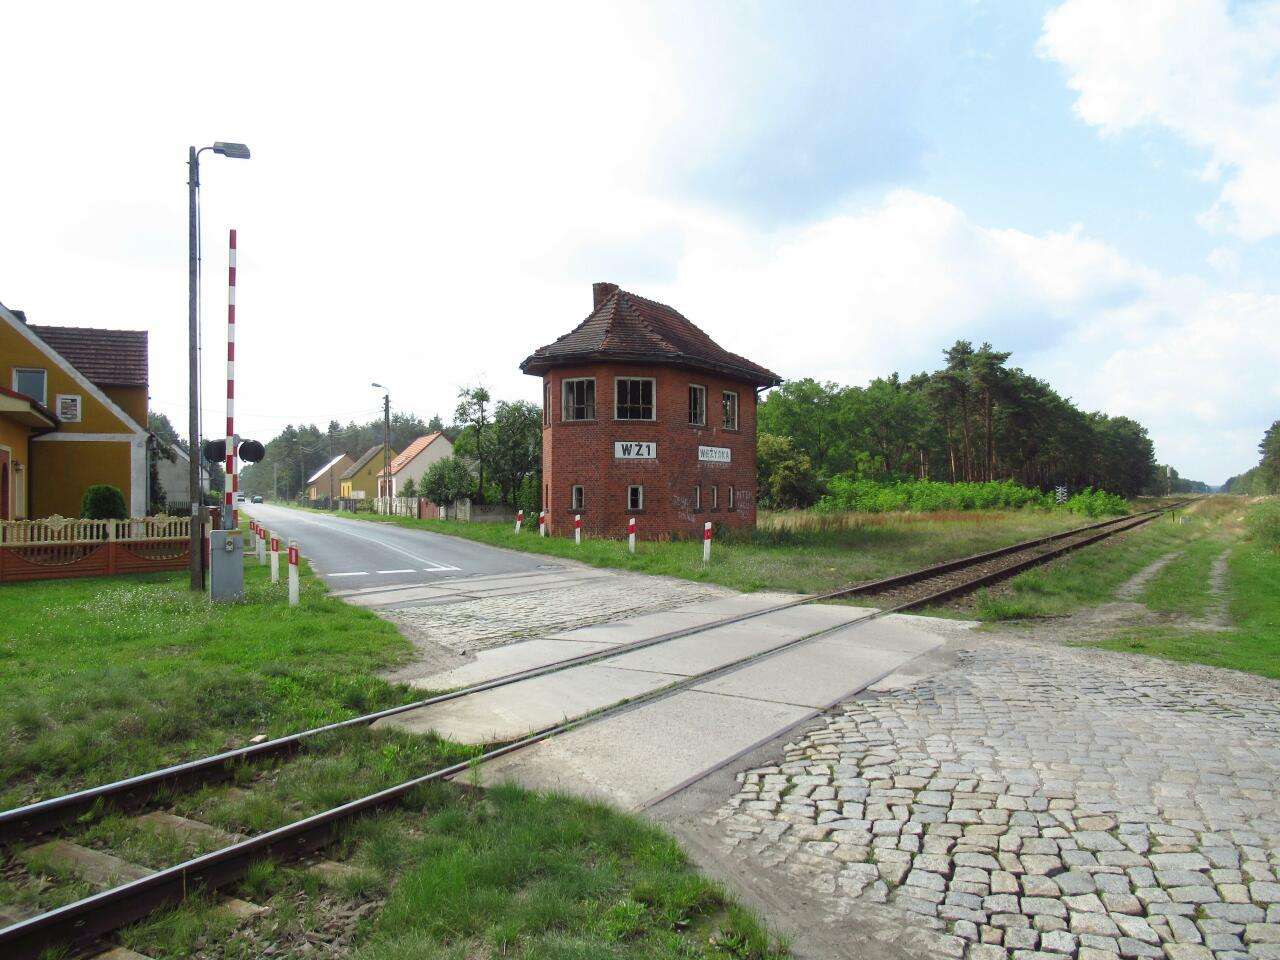 Road crossing on the railway line online puzzle